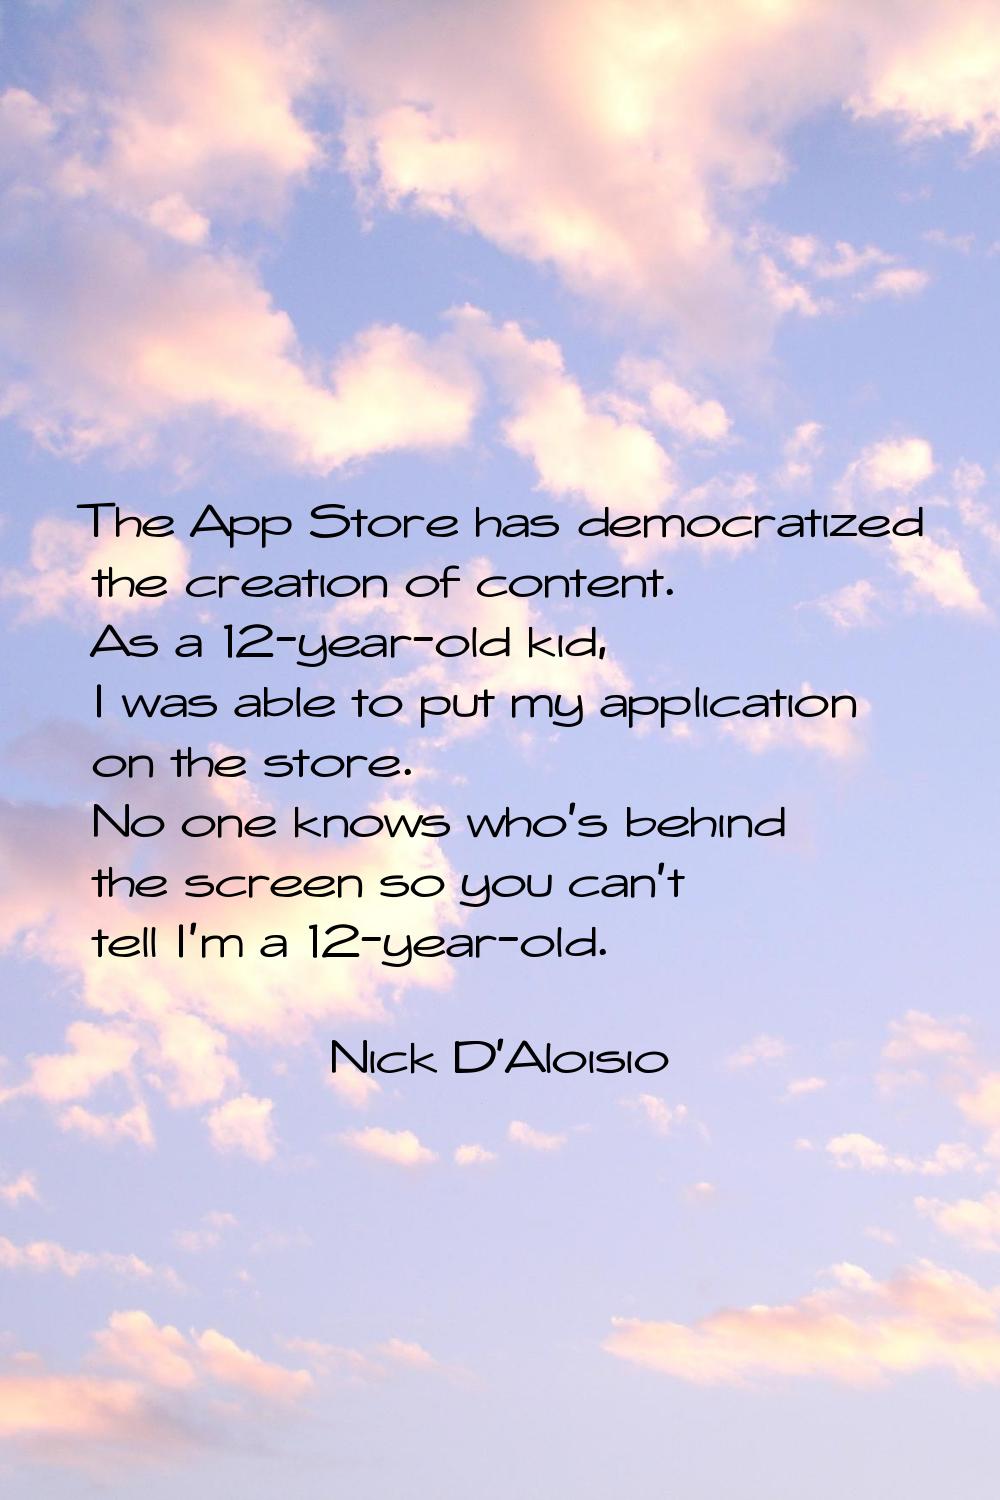 The App Store has democratized the creation of content. As a 12-year-old kid, I was able to put my 